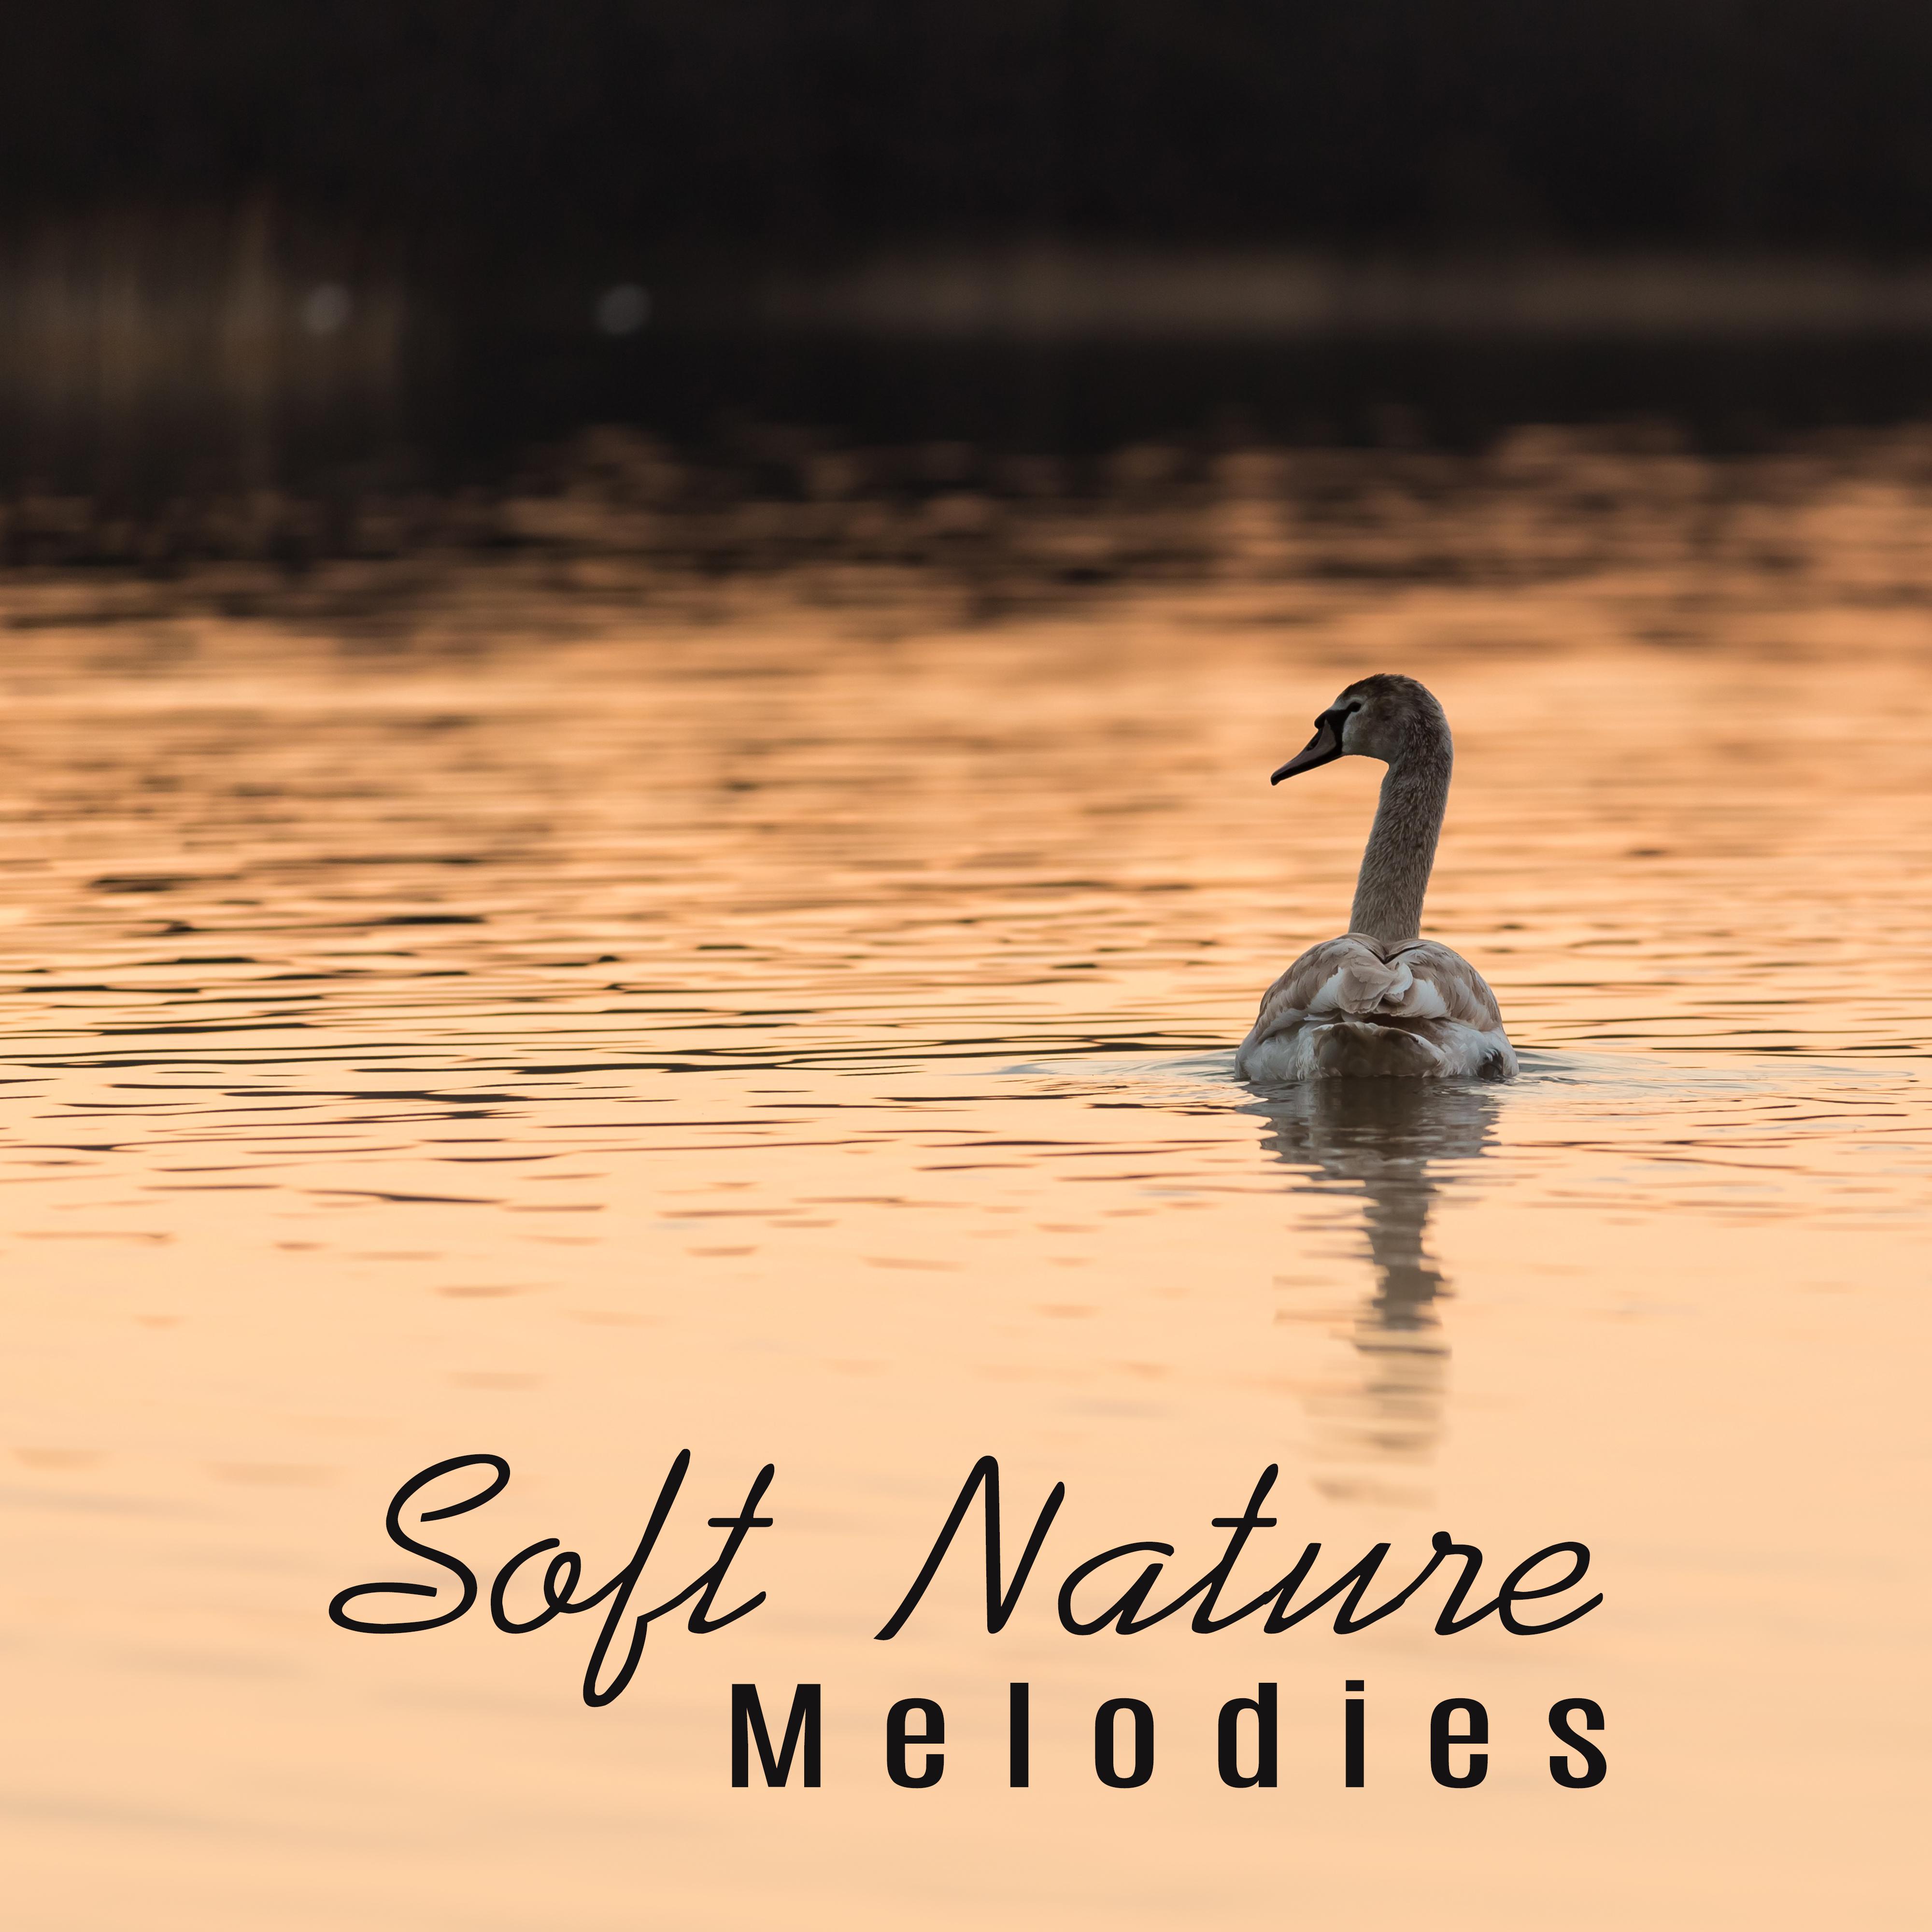 Soft Nature Melodies  Healing Sounds, Music for Mind Rest, Inner Relaxation, Peaceful Waves, No More Stress